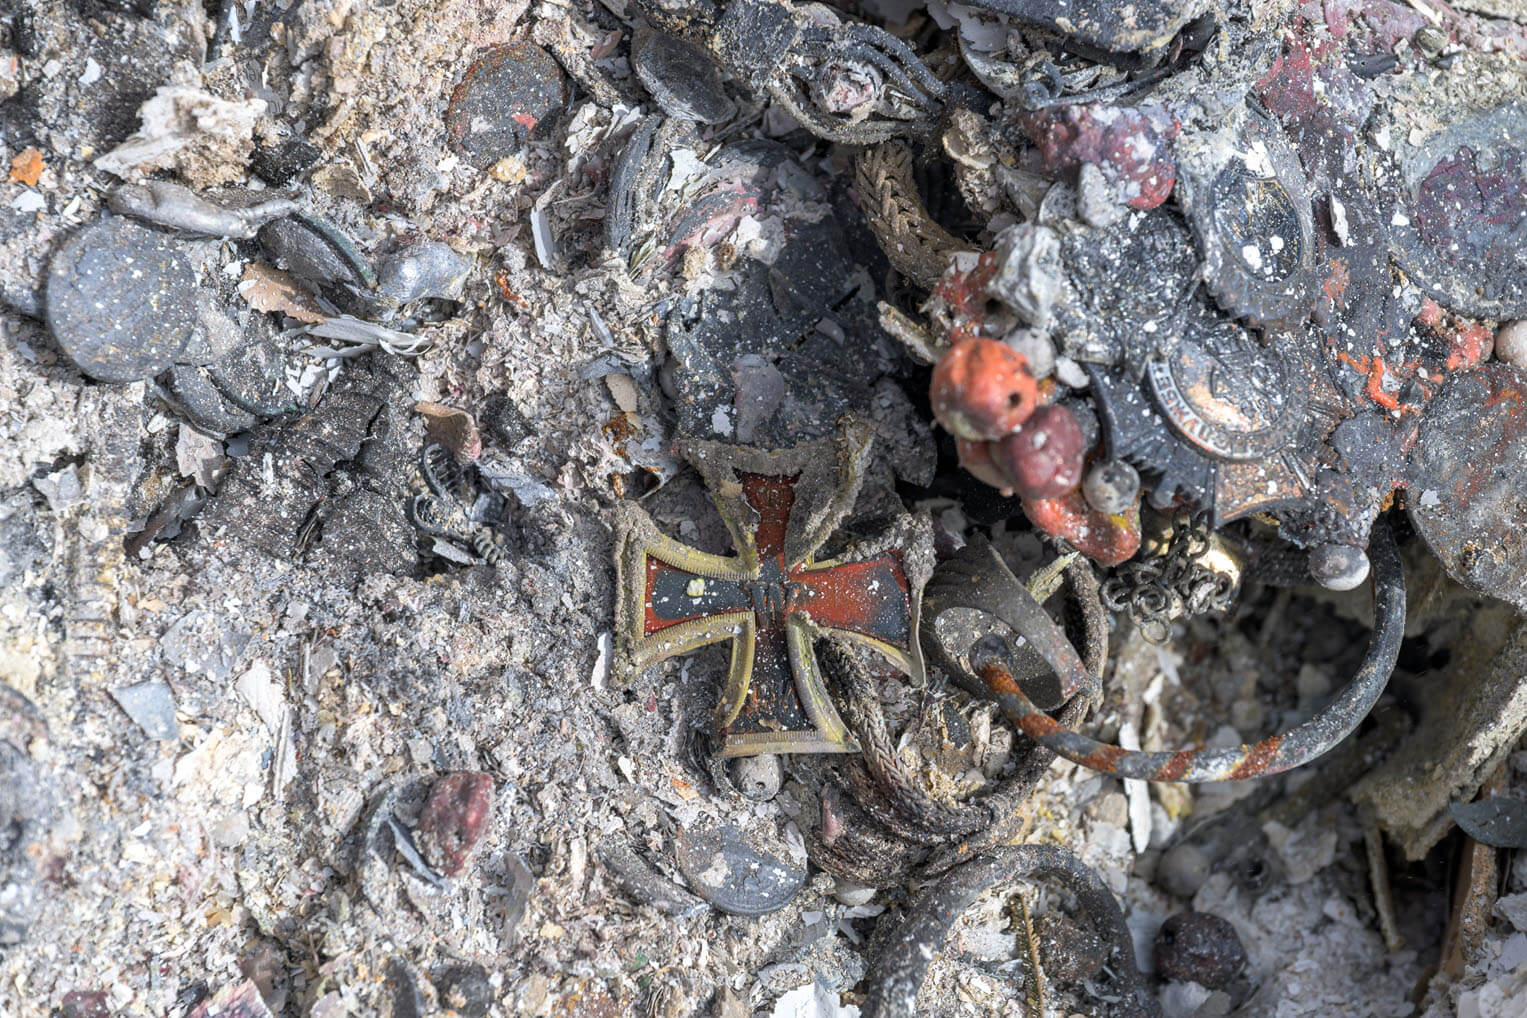 A military cross is pictured here, remarkably untouched by the unbelievable heat generated by the fast-spreading flames on Maui, Hawaii, August 8.